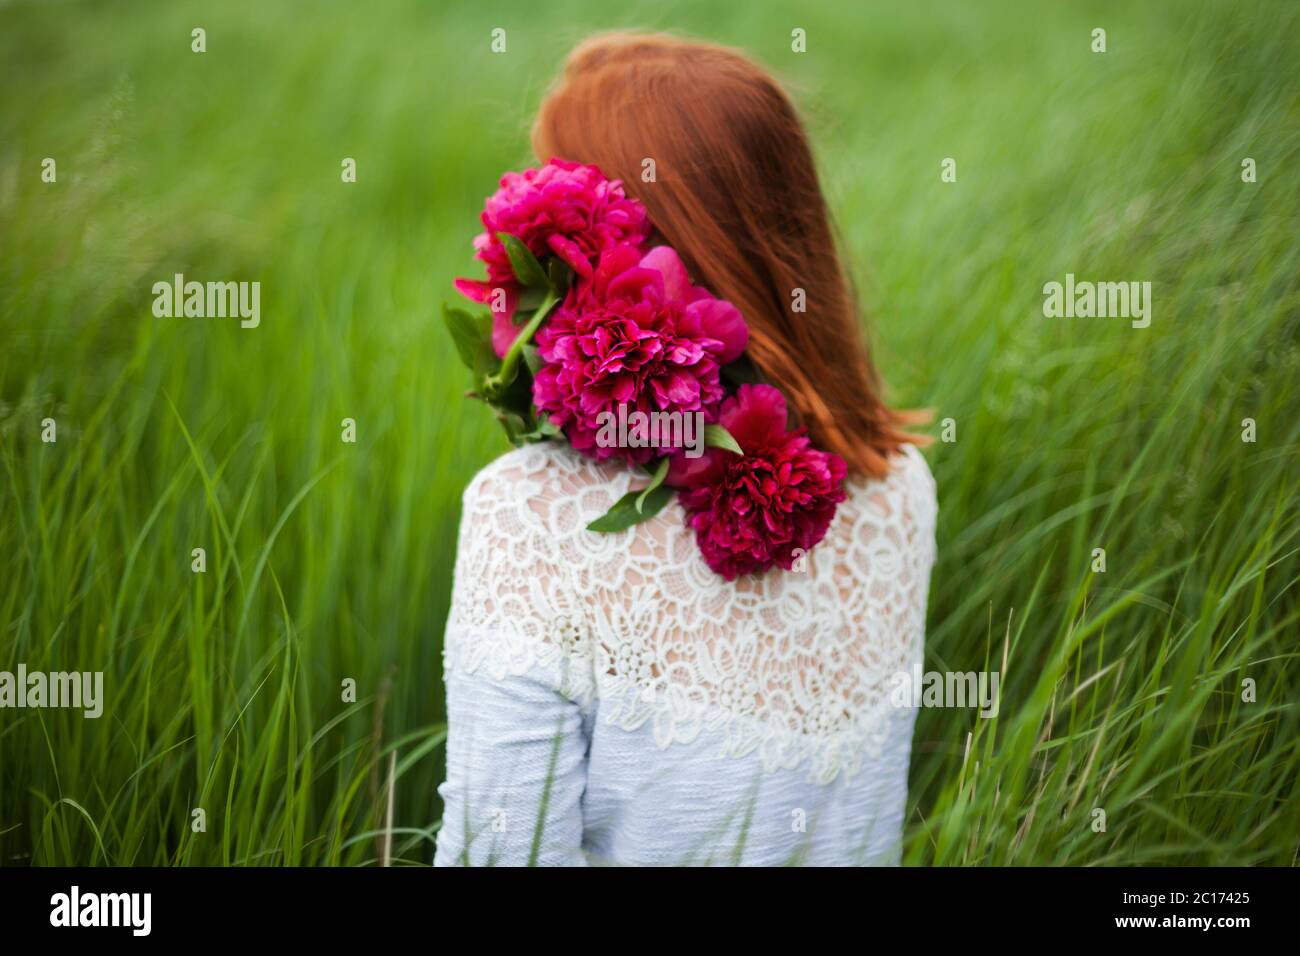 Girl with peony bouquet sitting in the grass Stock Photo